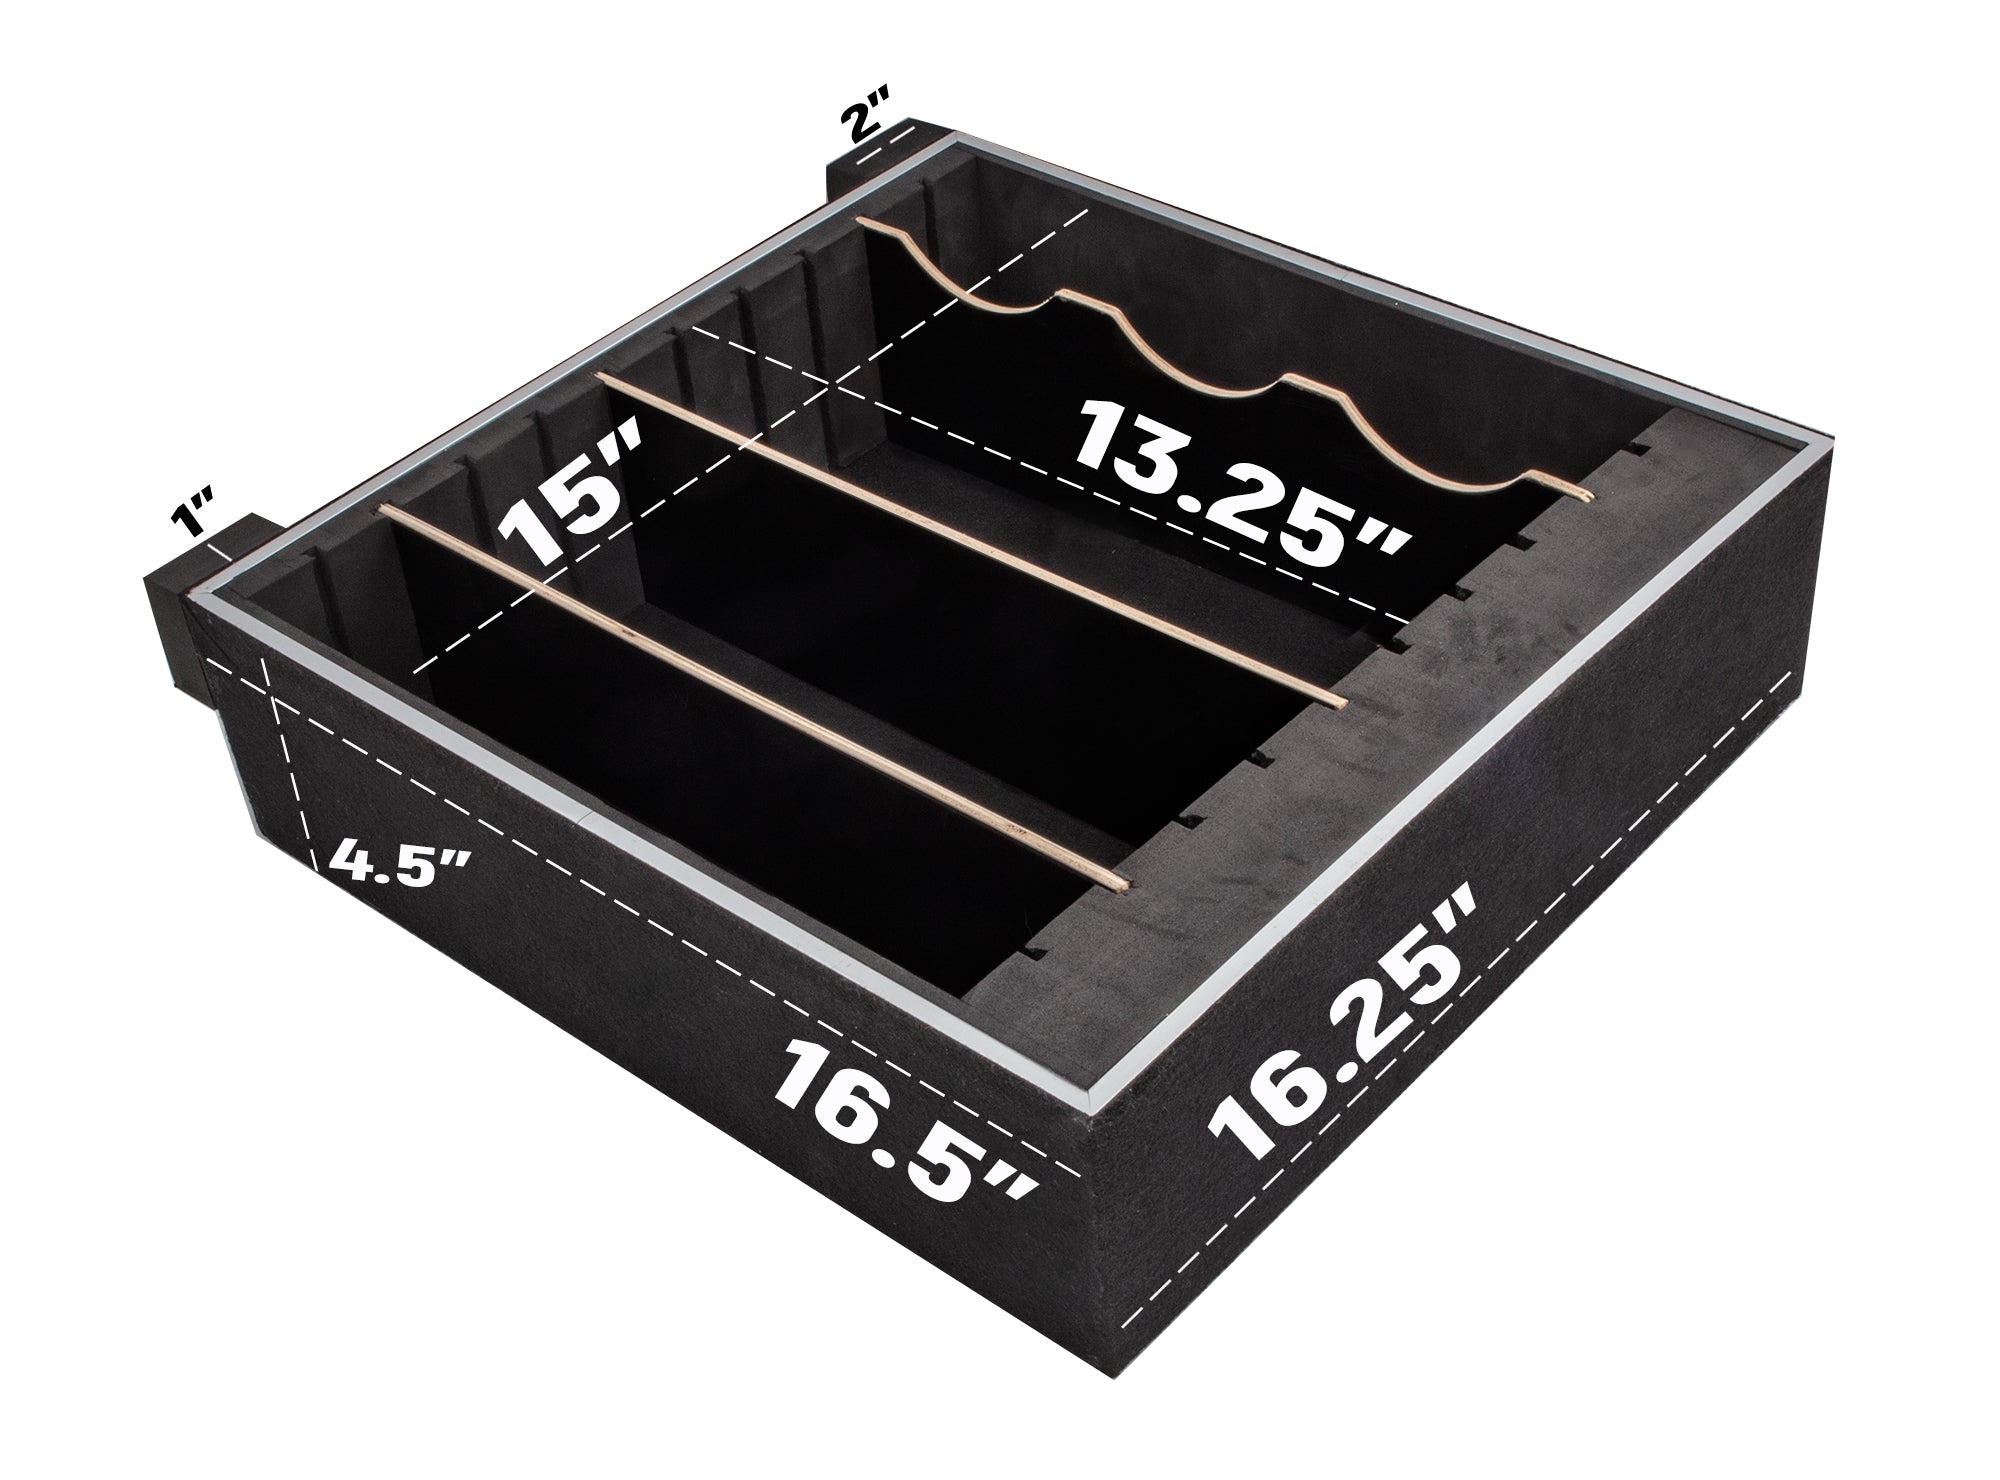 HYC-3UD Drawer with Divider